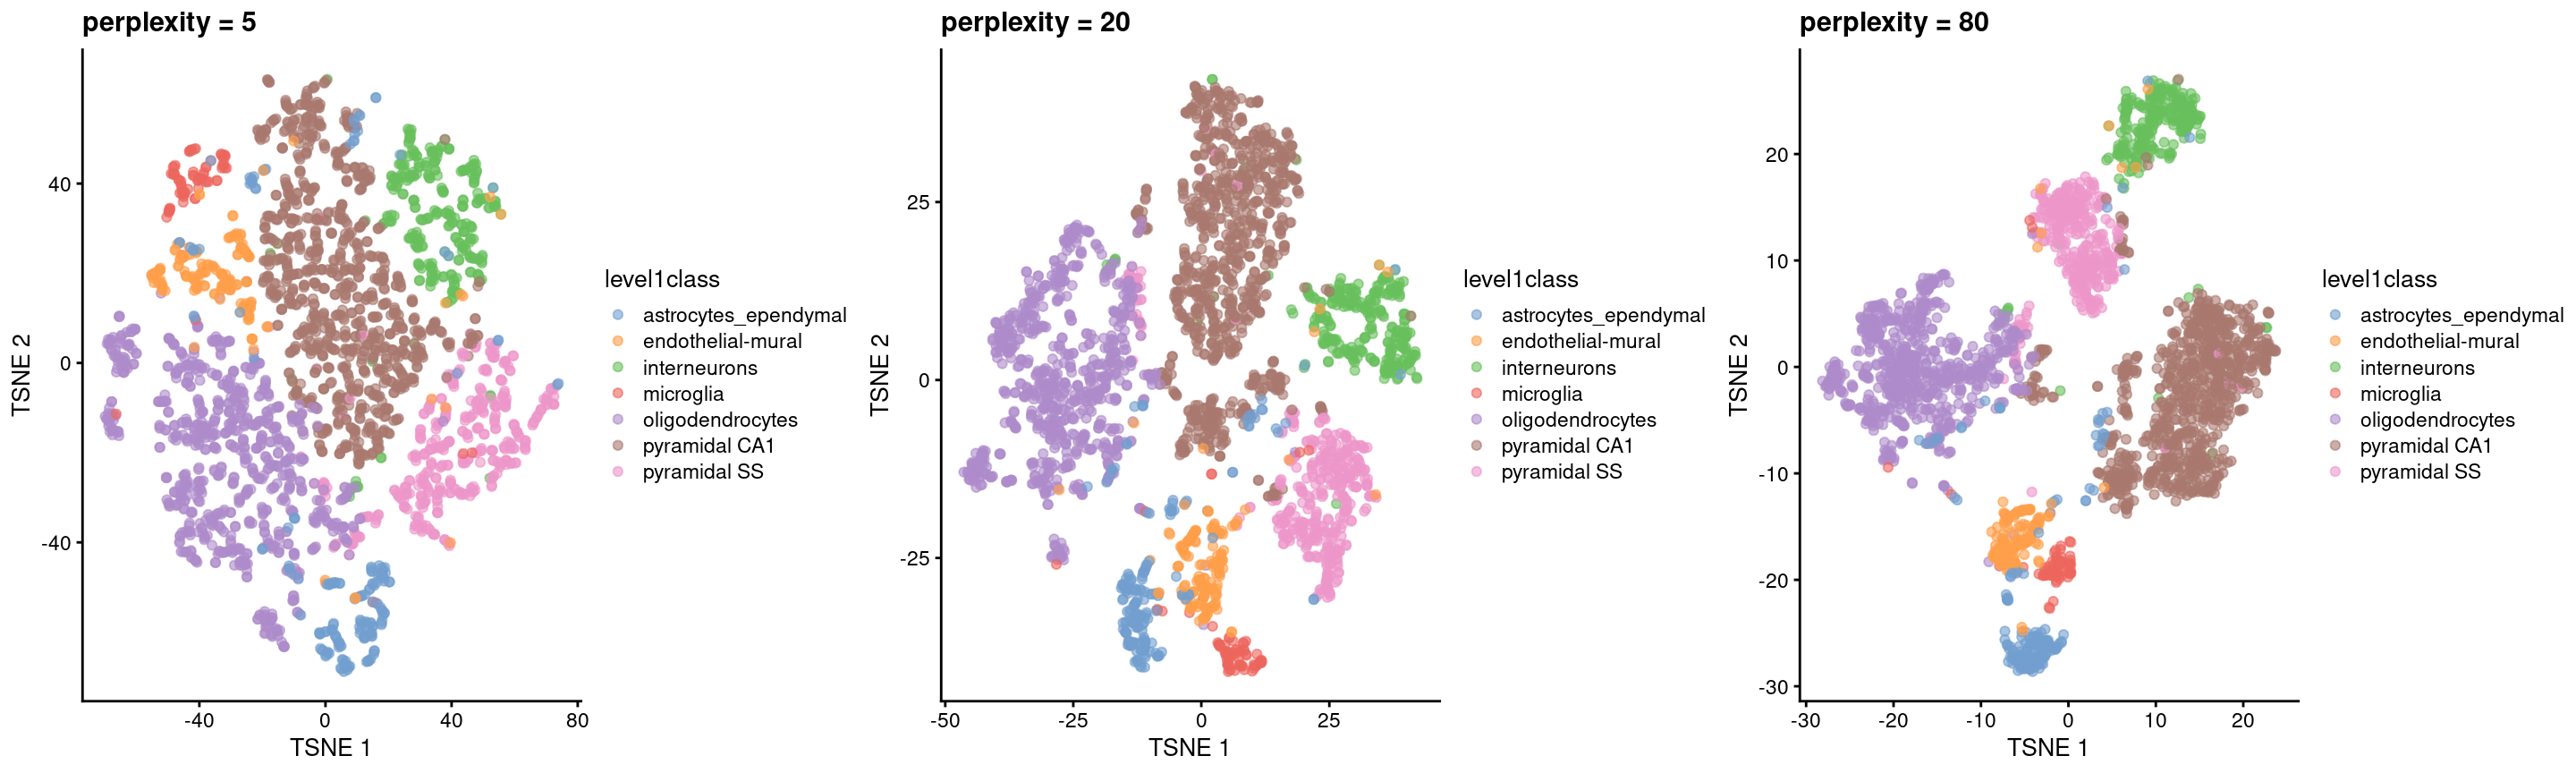 $t$-SNE plots constructed from the top PCs in the Zeisel brain dataset, using a range of perplexity values. Each point represents a cell, coloured according to its annotation.